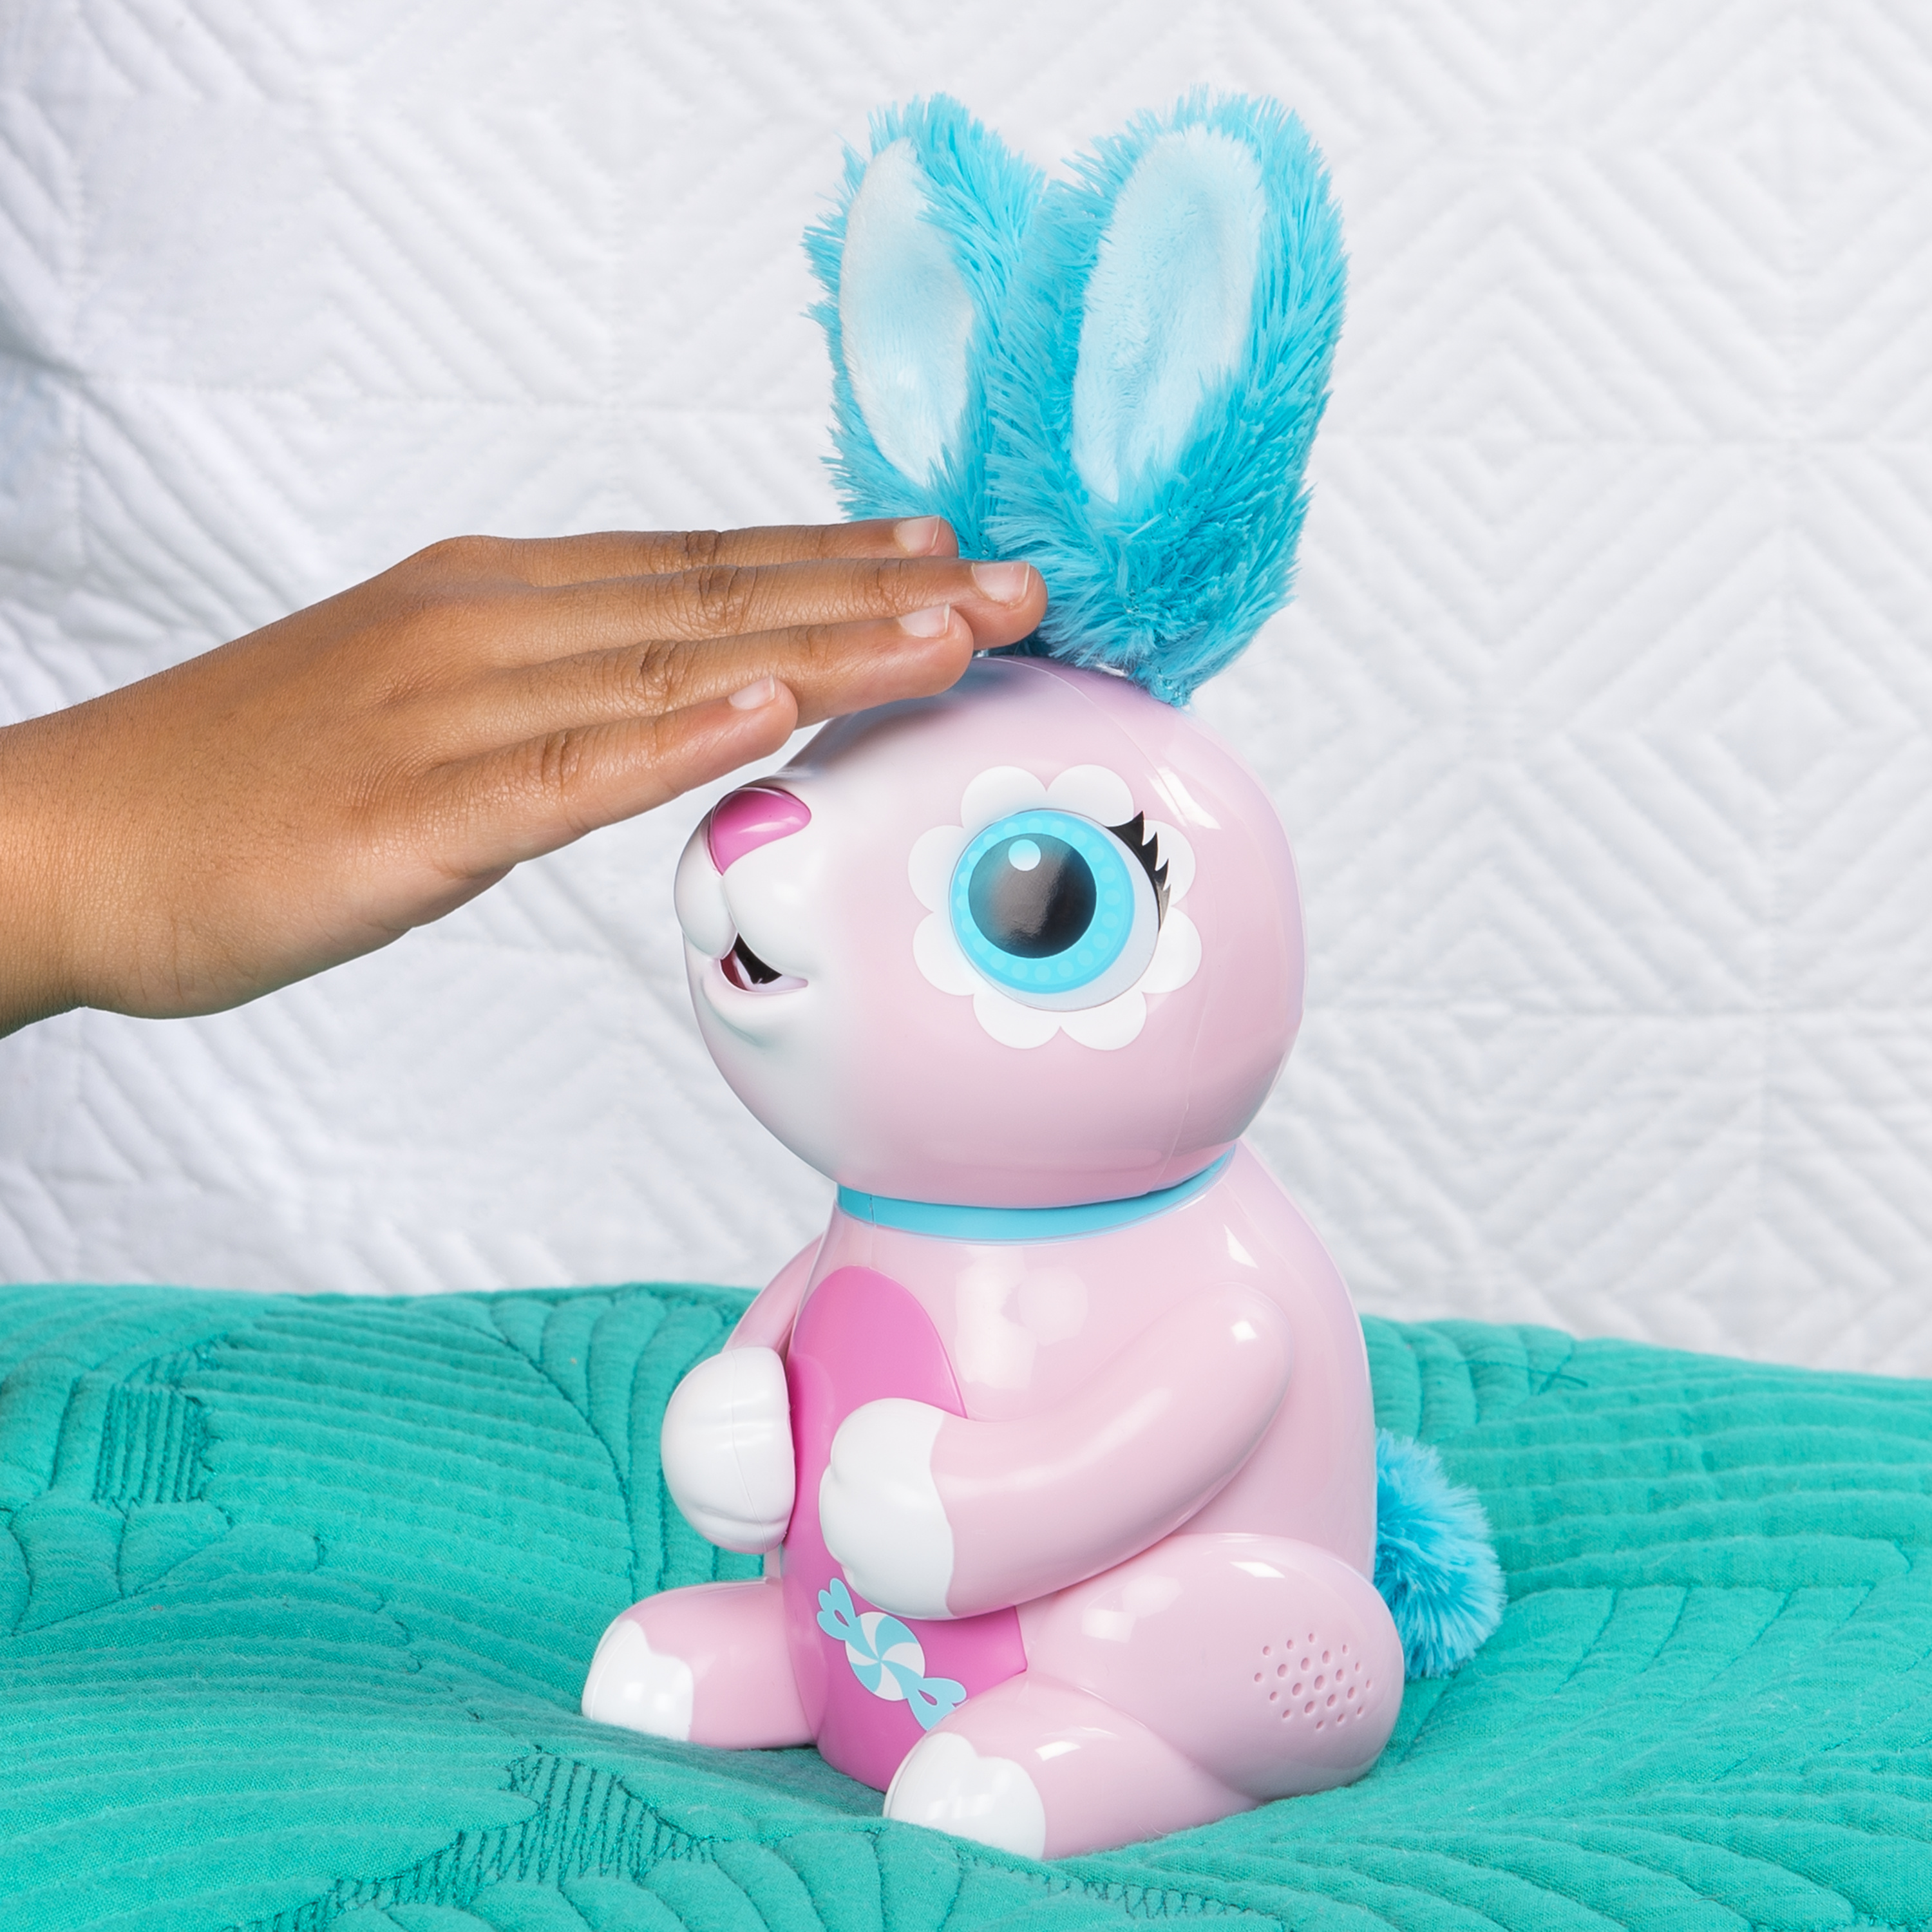 Zoomer - Hungry Bunnies, Shreddy, Interactive Robotic Rabbit that Eats, for Ages 5 and Up - image 4 of 8